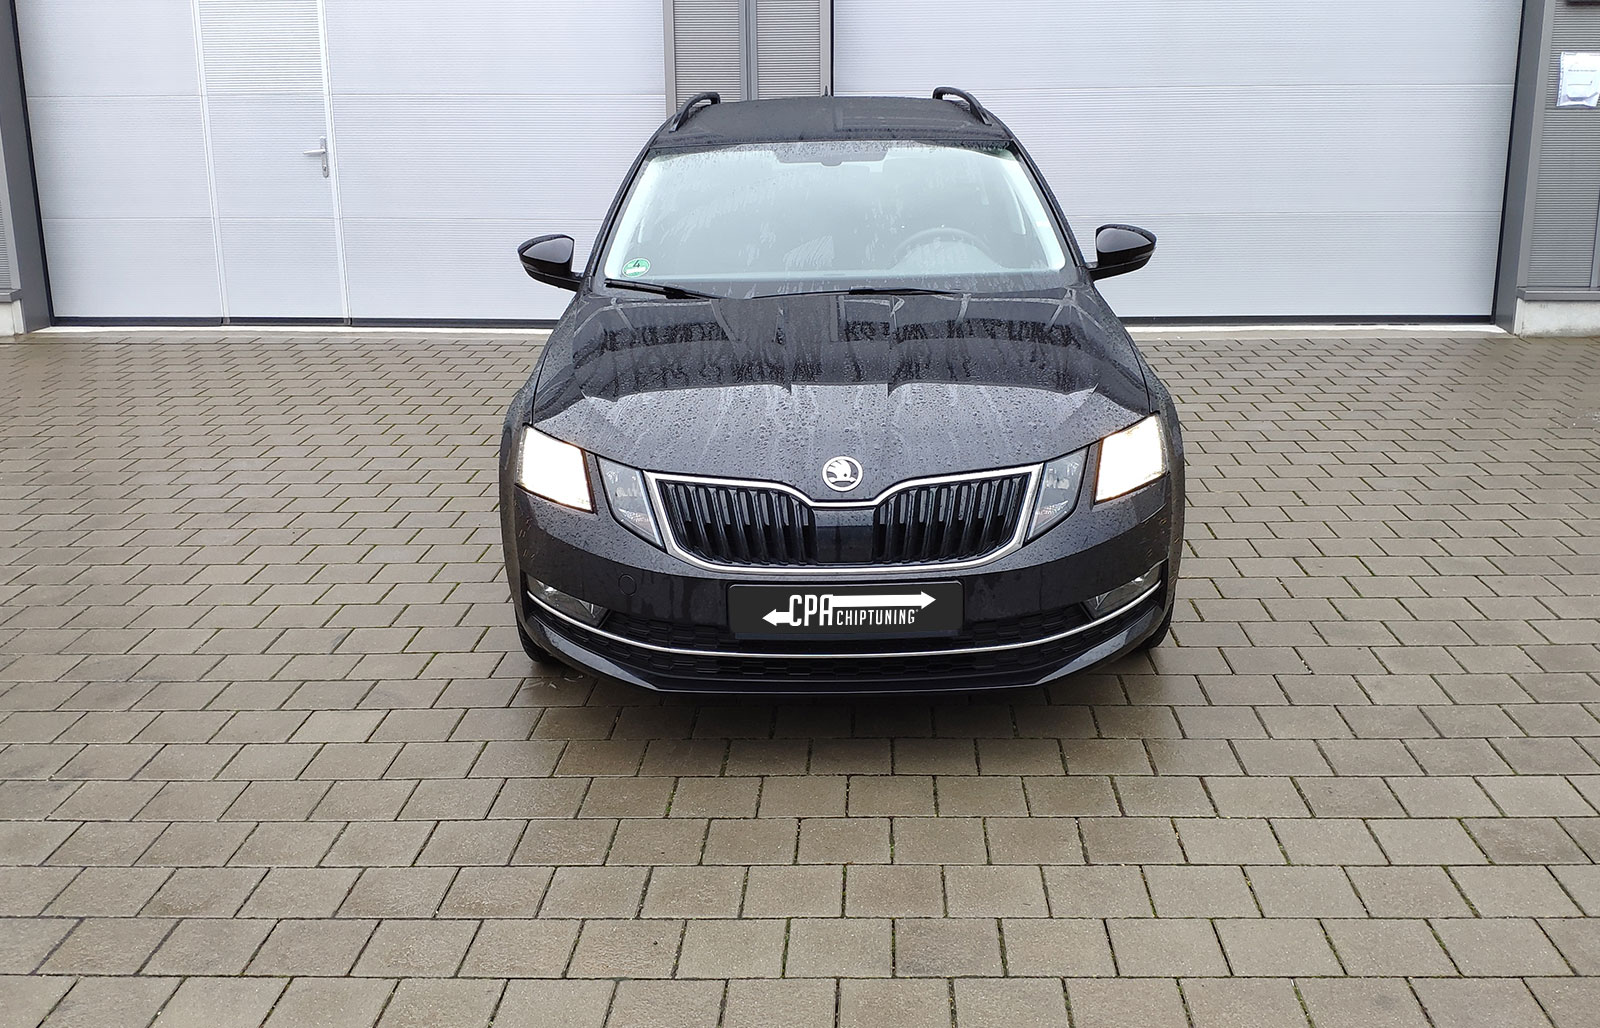 Skoda Octavia 1.0 TSI chiptuning - get more out of your liter!